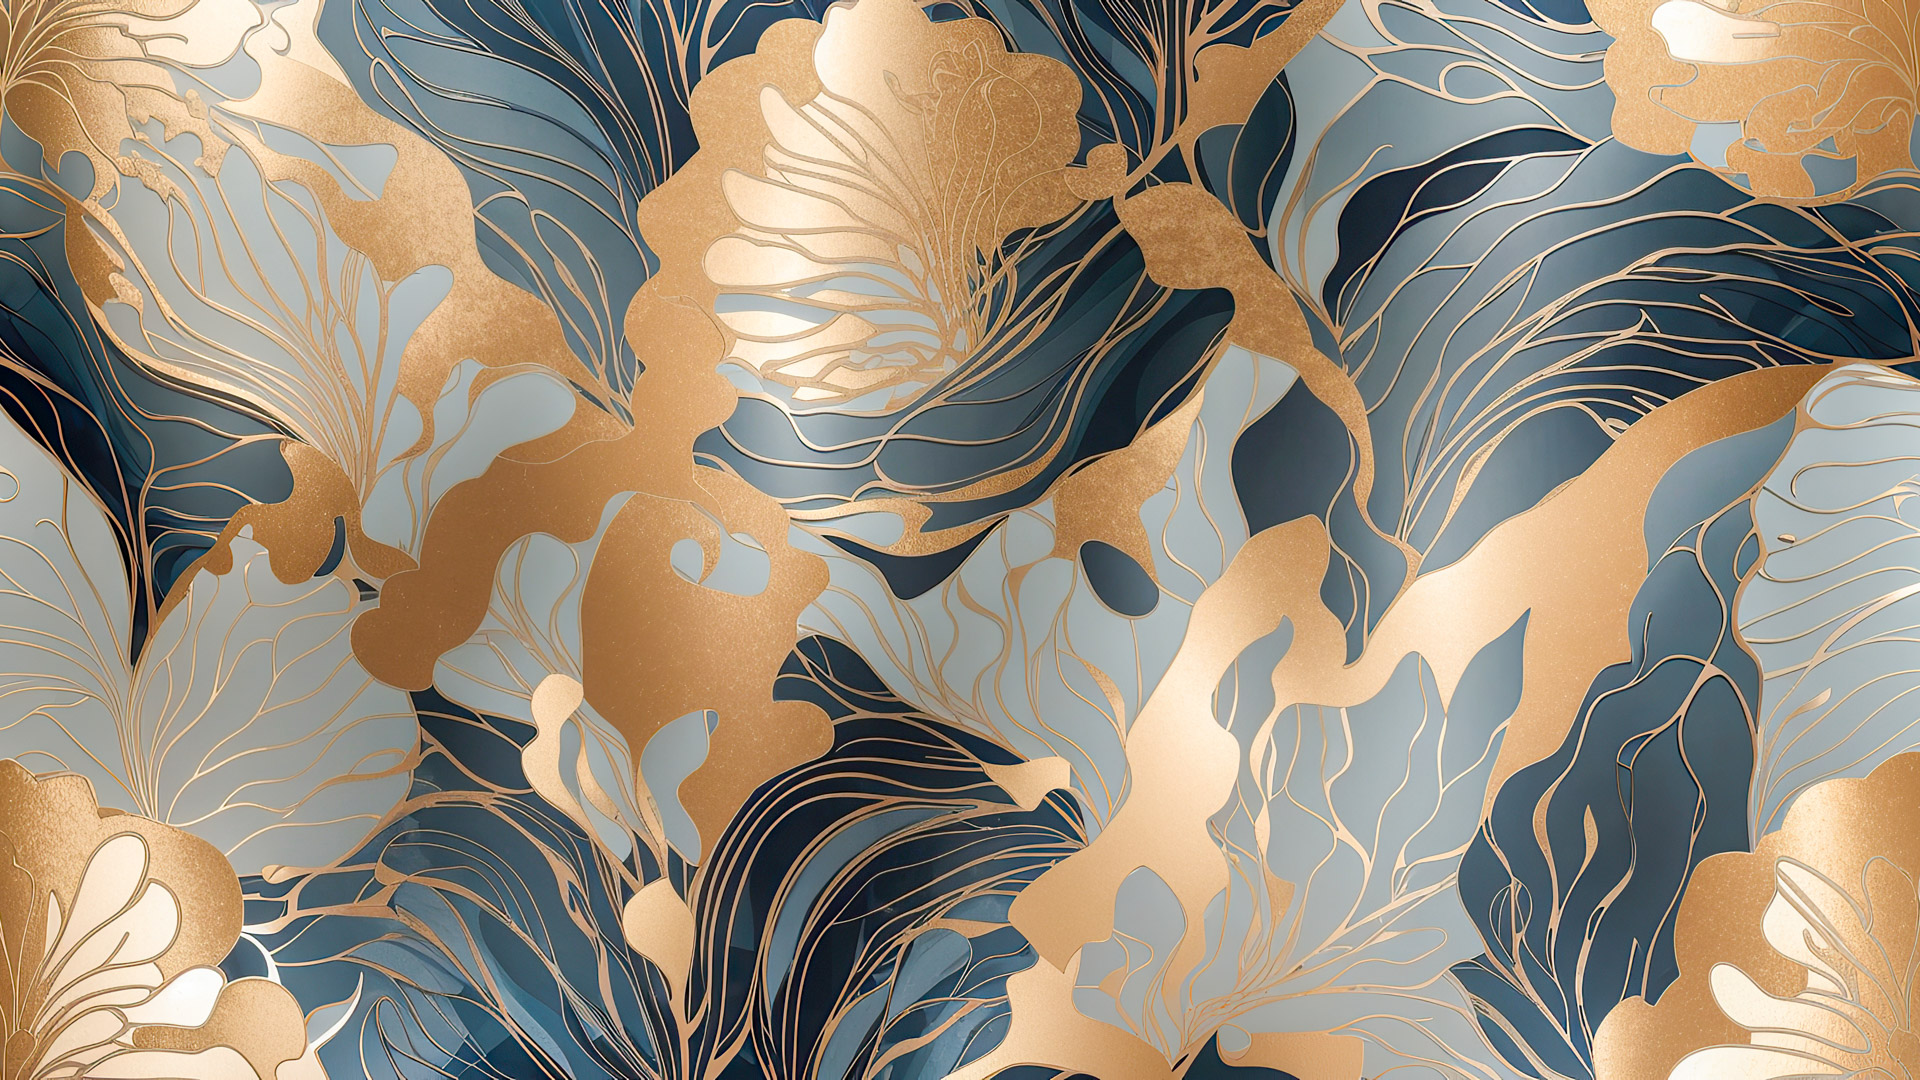 Explore the future with HD abstract wallpaper for desktop, merging organic patterns and metallic textures for an ethereal ambiance.